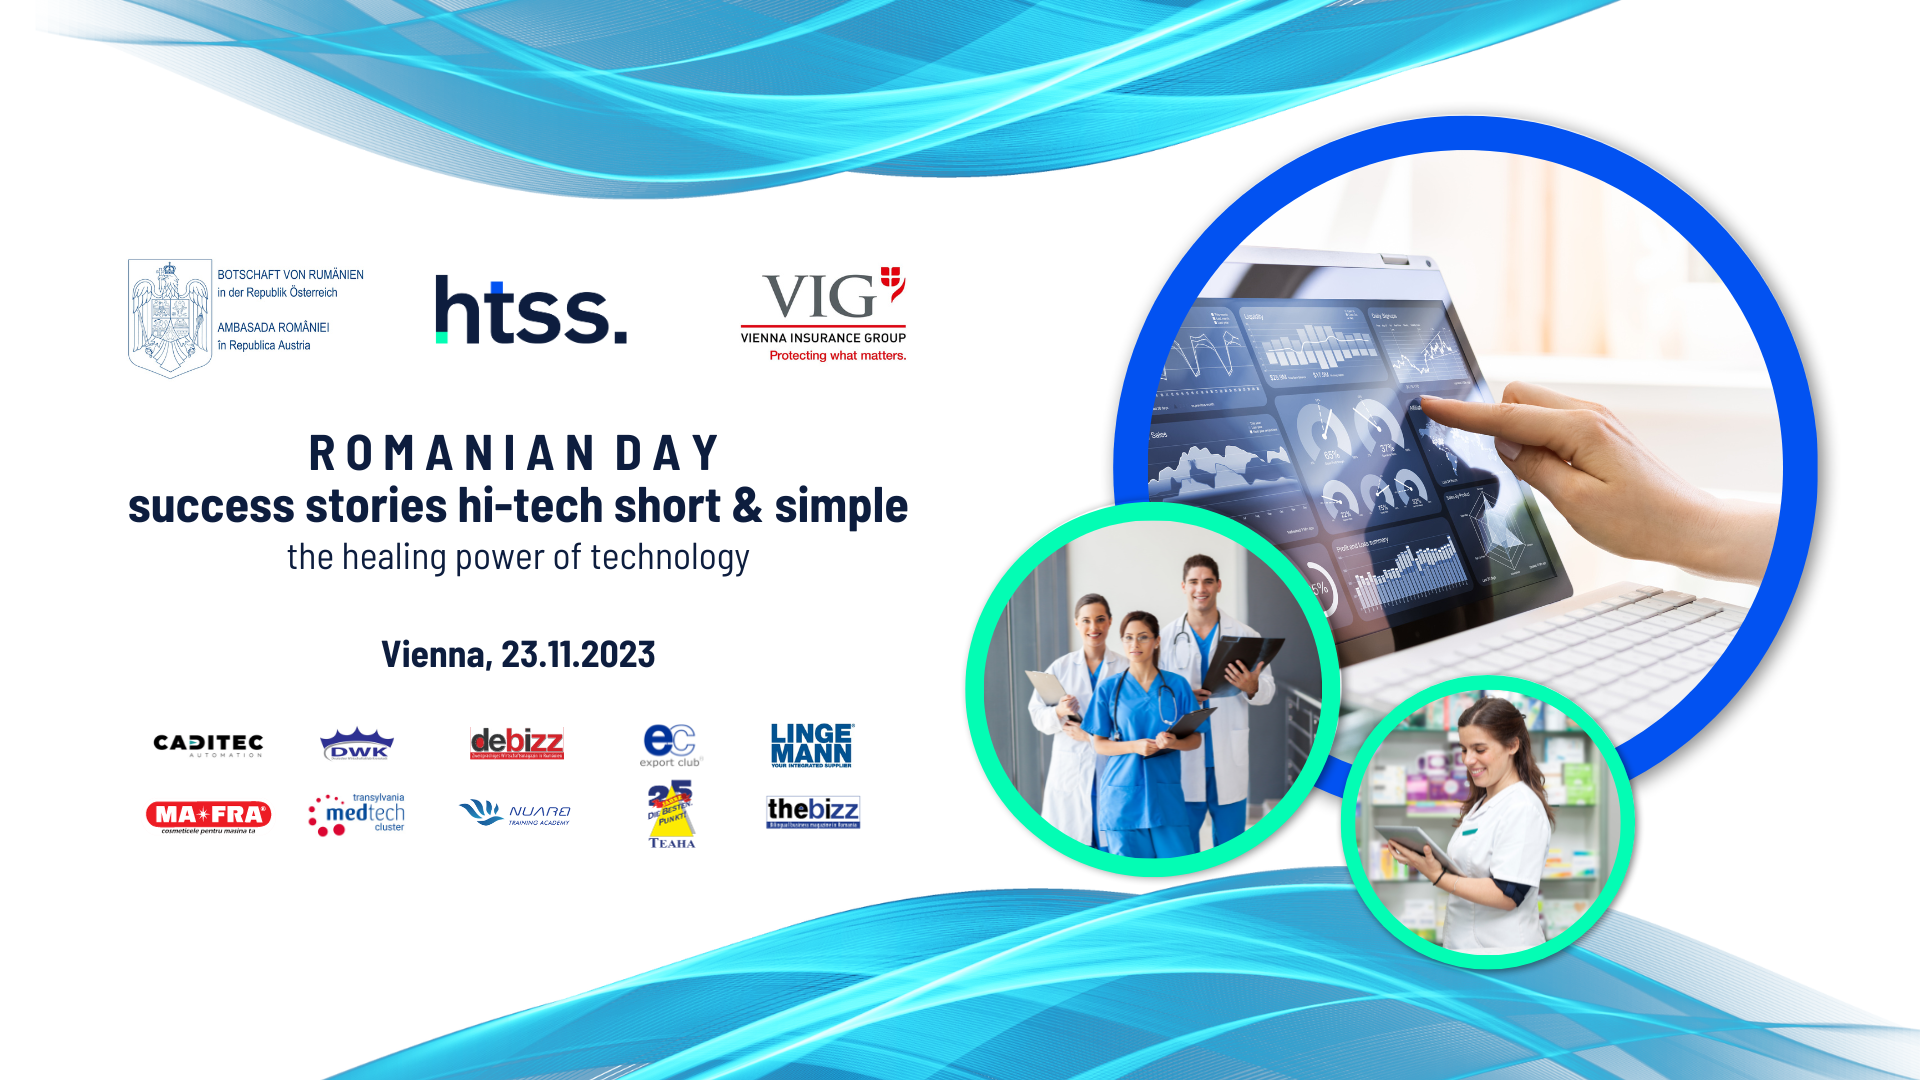 Harnessing the Healing Power of Technology: exploring hi-tech short & simple success stories at the Romanian Day in Vienna.